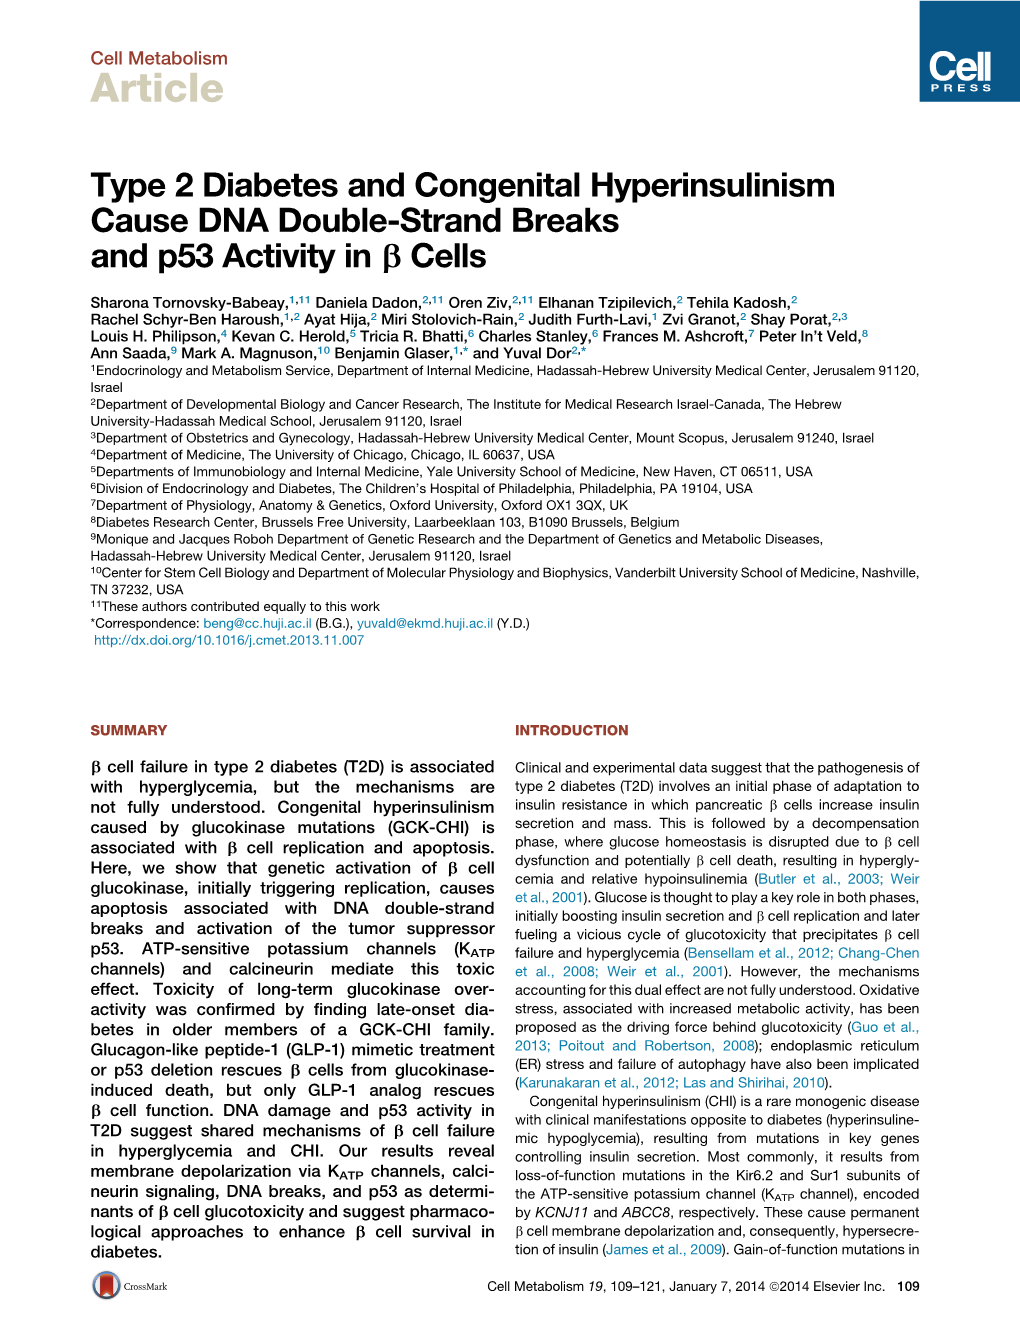 Type 2 Diabetes and Congenital Hyperinsulinism Cause DNA Double-Strand Breaks and P53 Activity in B Cells